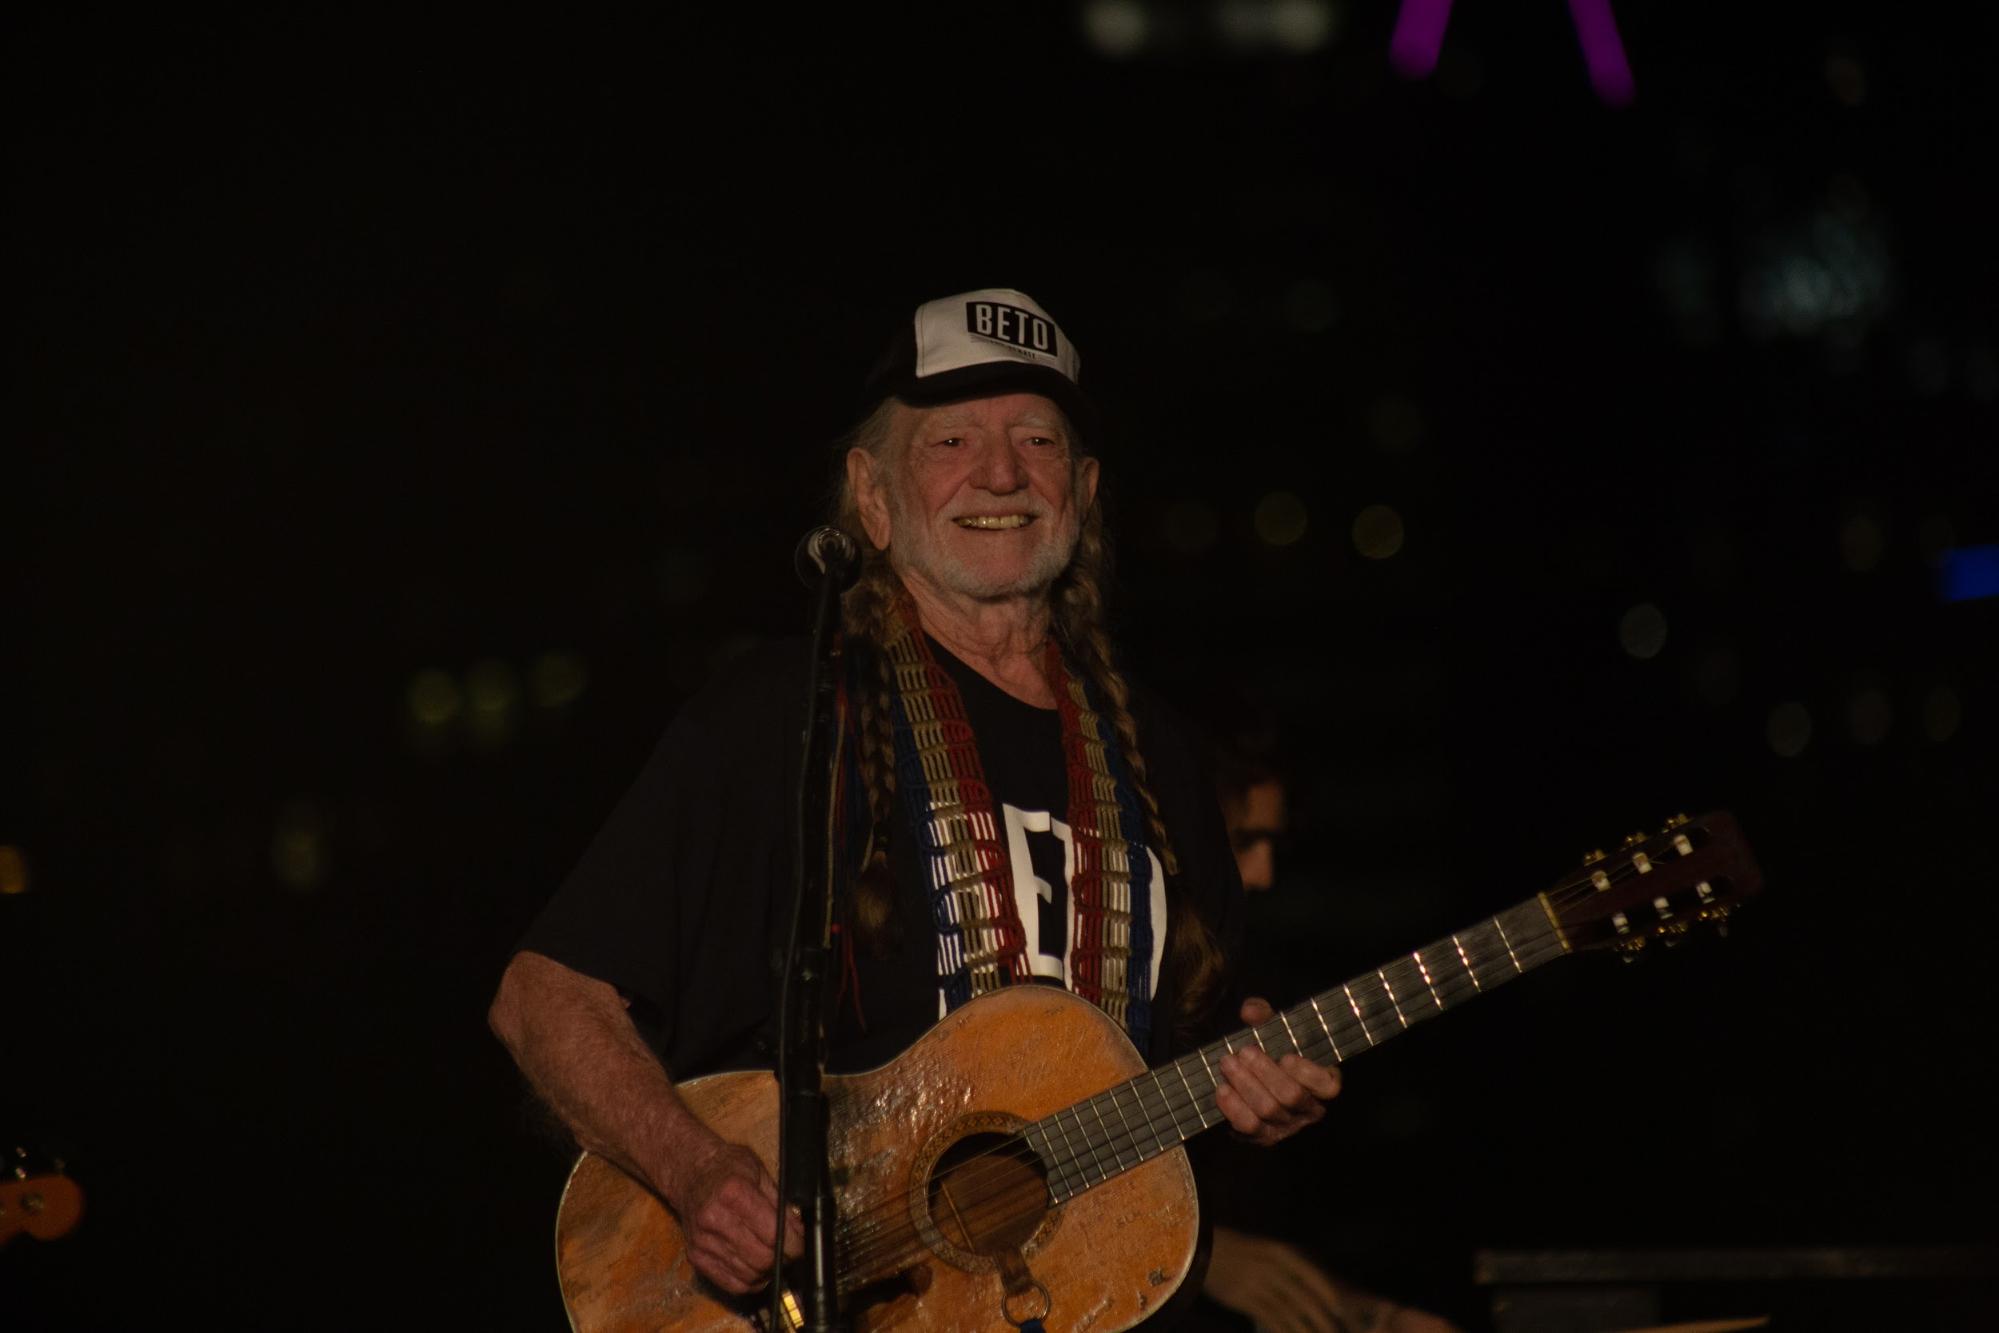   Willie Nelson sports a Beto hat and shirt for his performance. Photo by Jonathan Castro.  